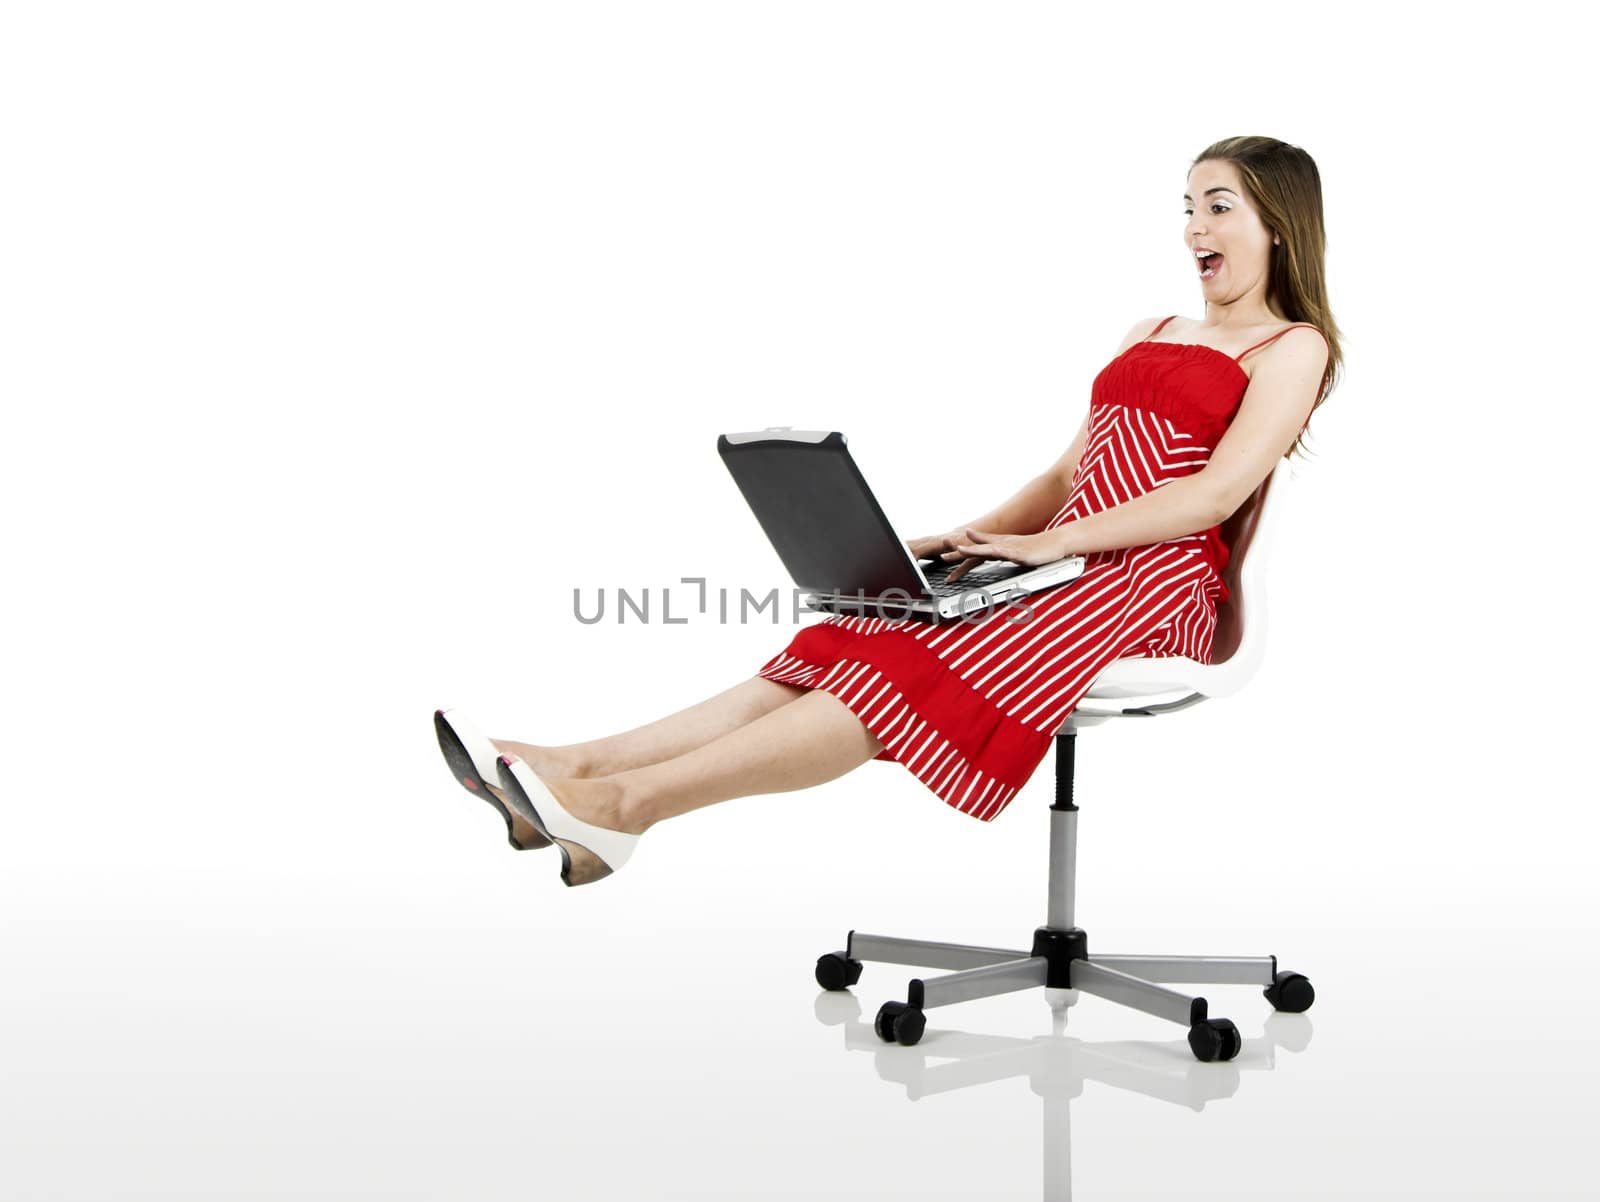 Portrait of a happy woman seated on a chair with a laptop - isolated on white